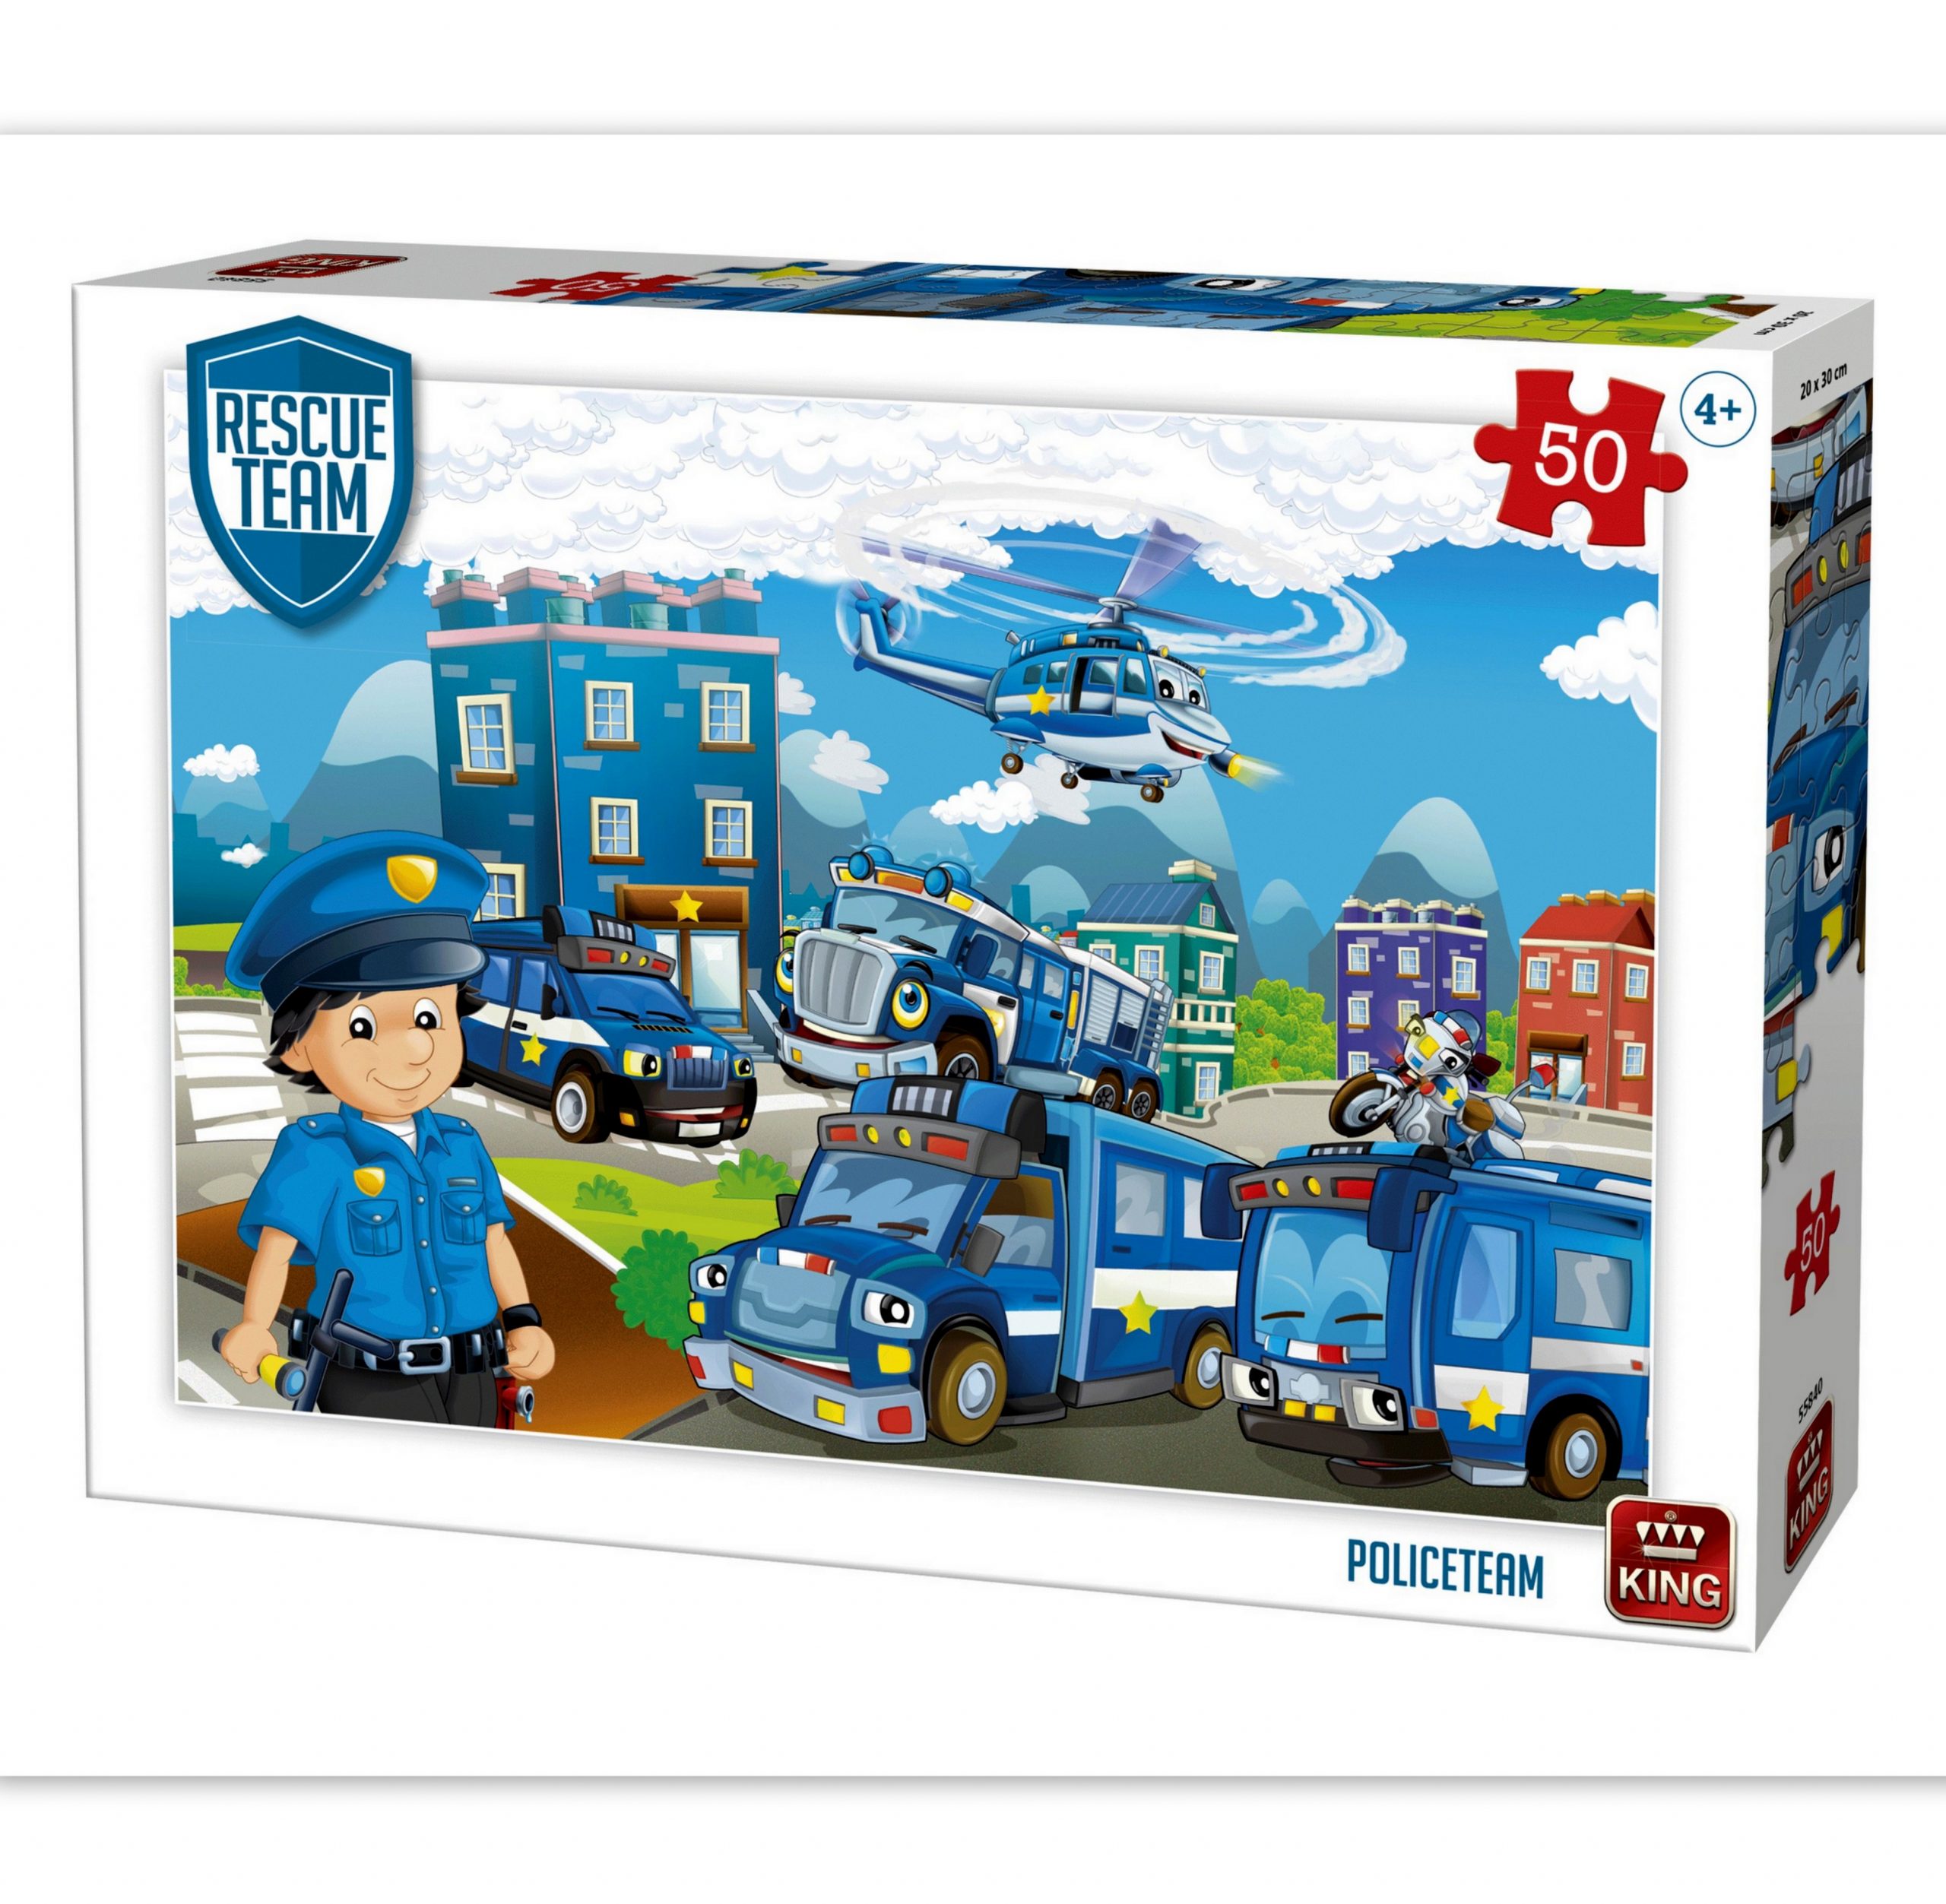 Puzzle Kiddy Rescue Team Police Team 50pcs